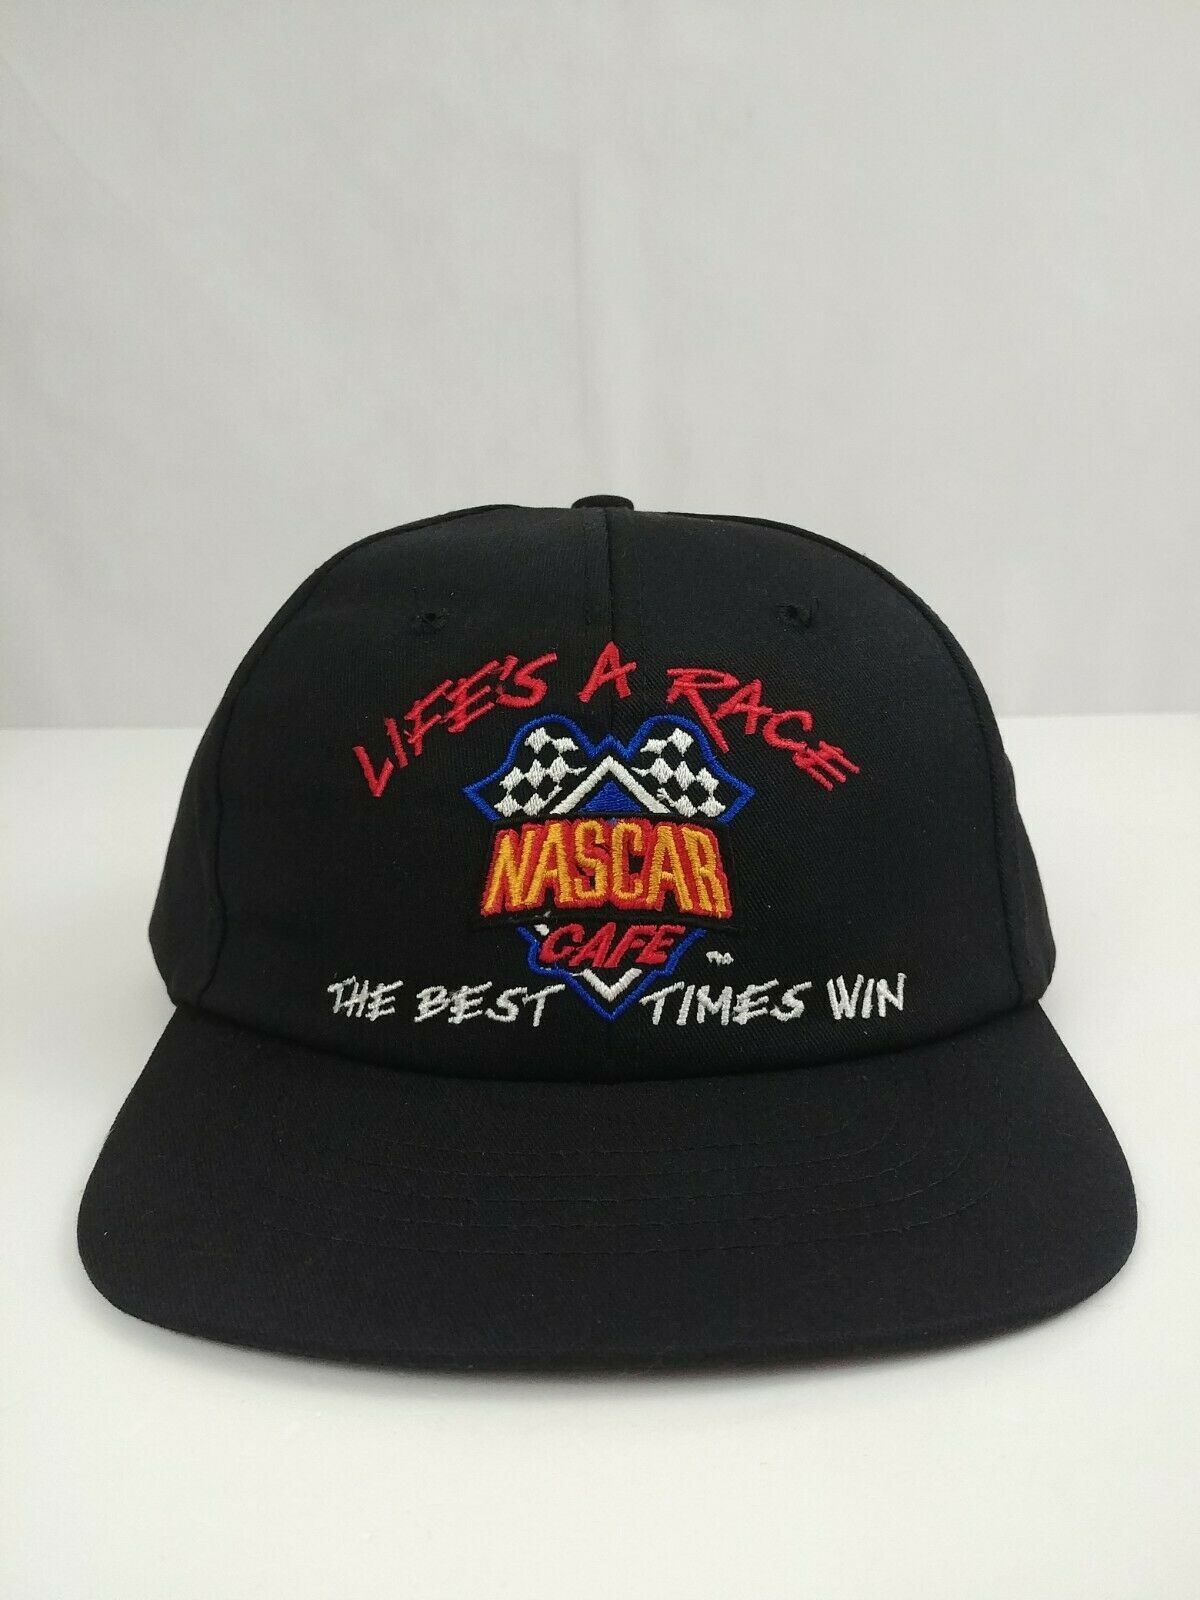 Primary image for Vintage Nascar Cafe Life's A Race The Best Times Win Snapback Baseball Cap